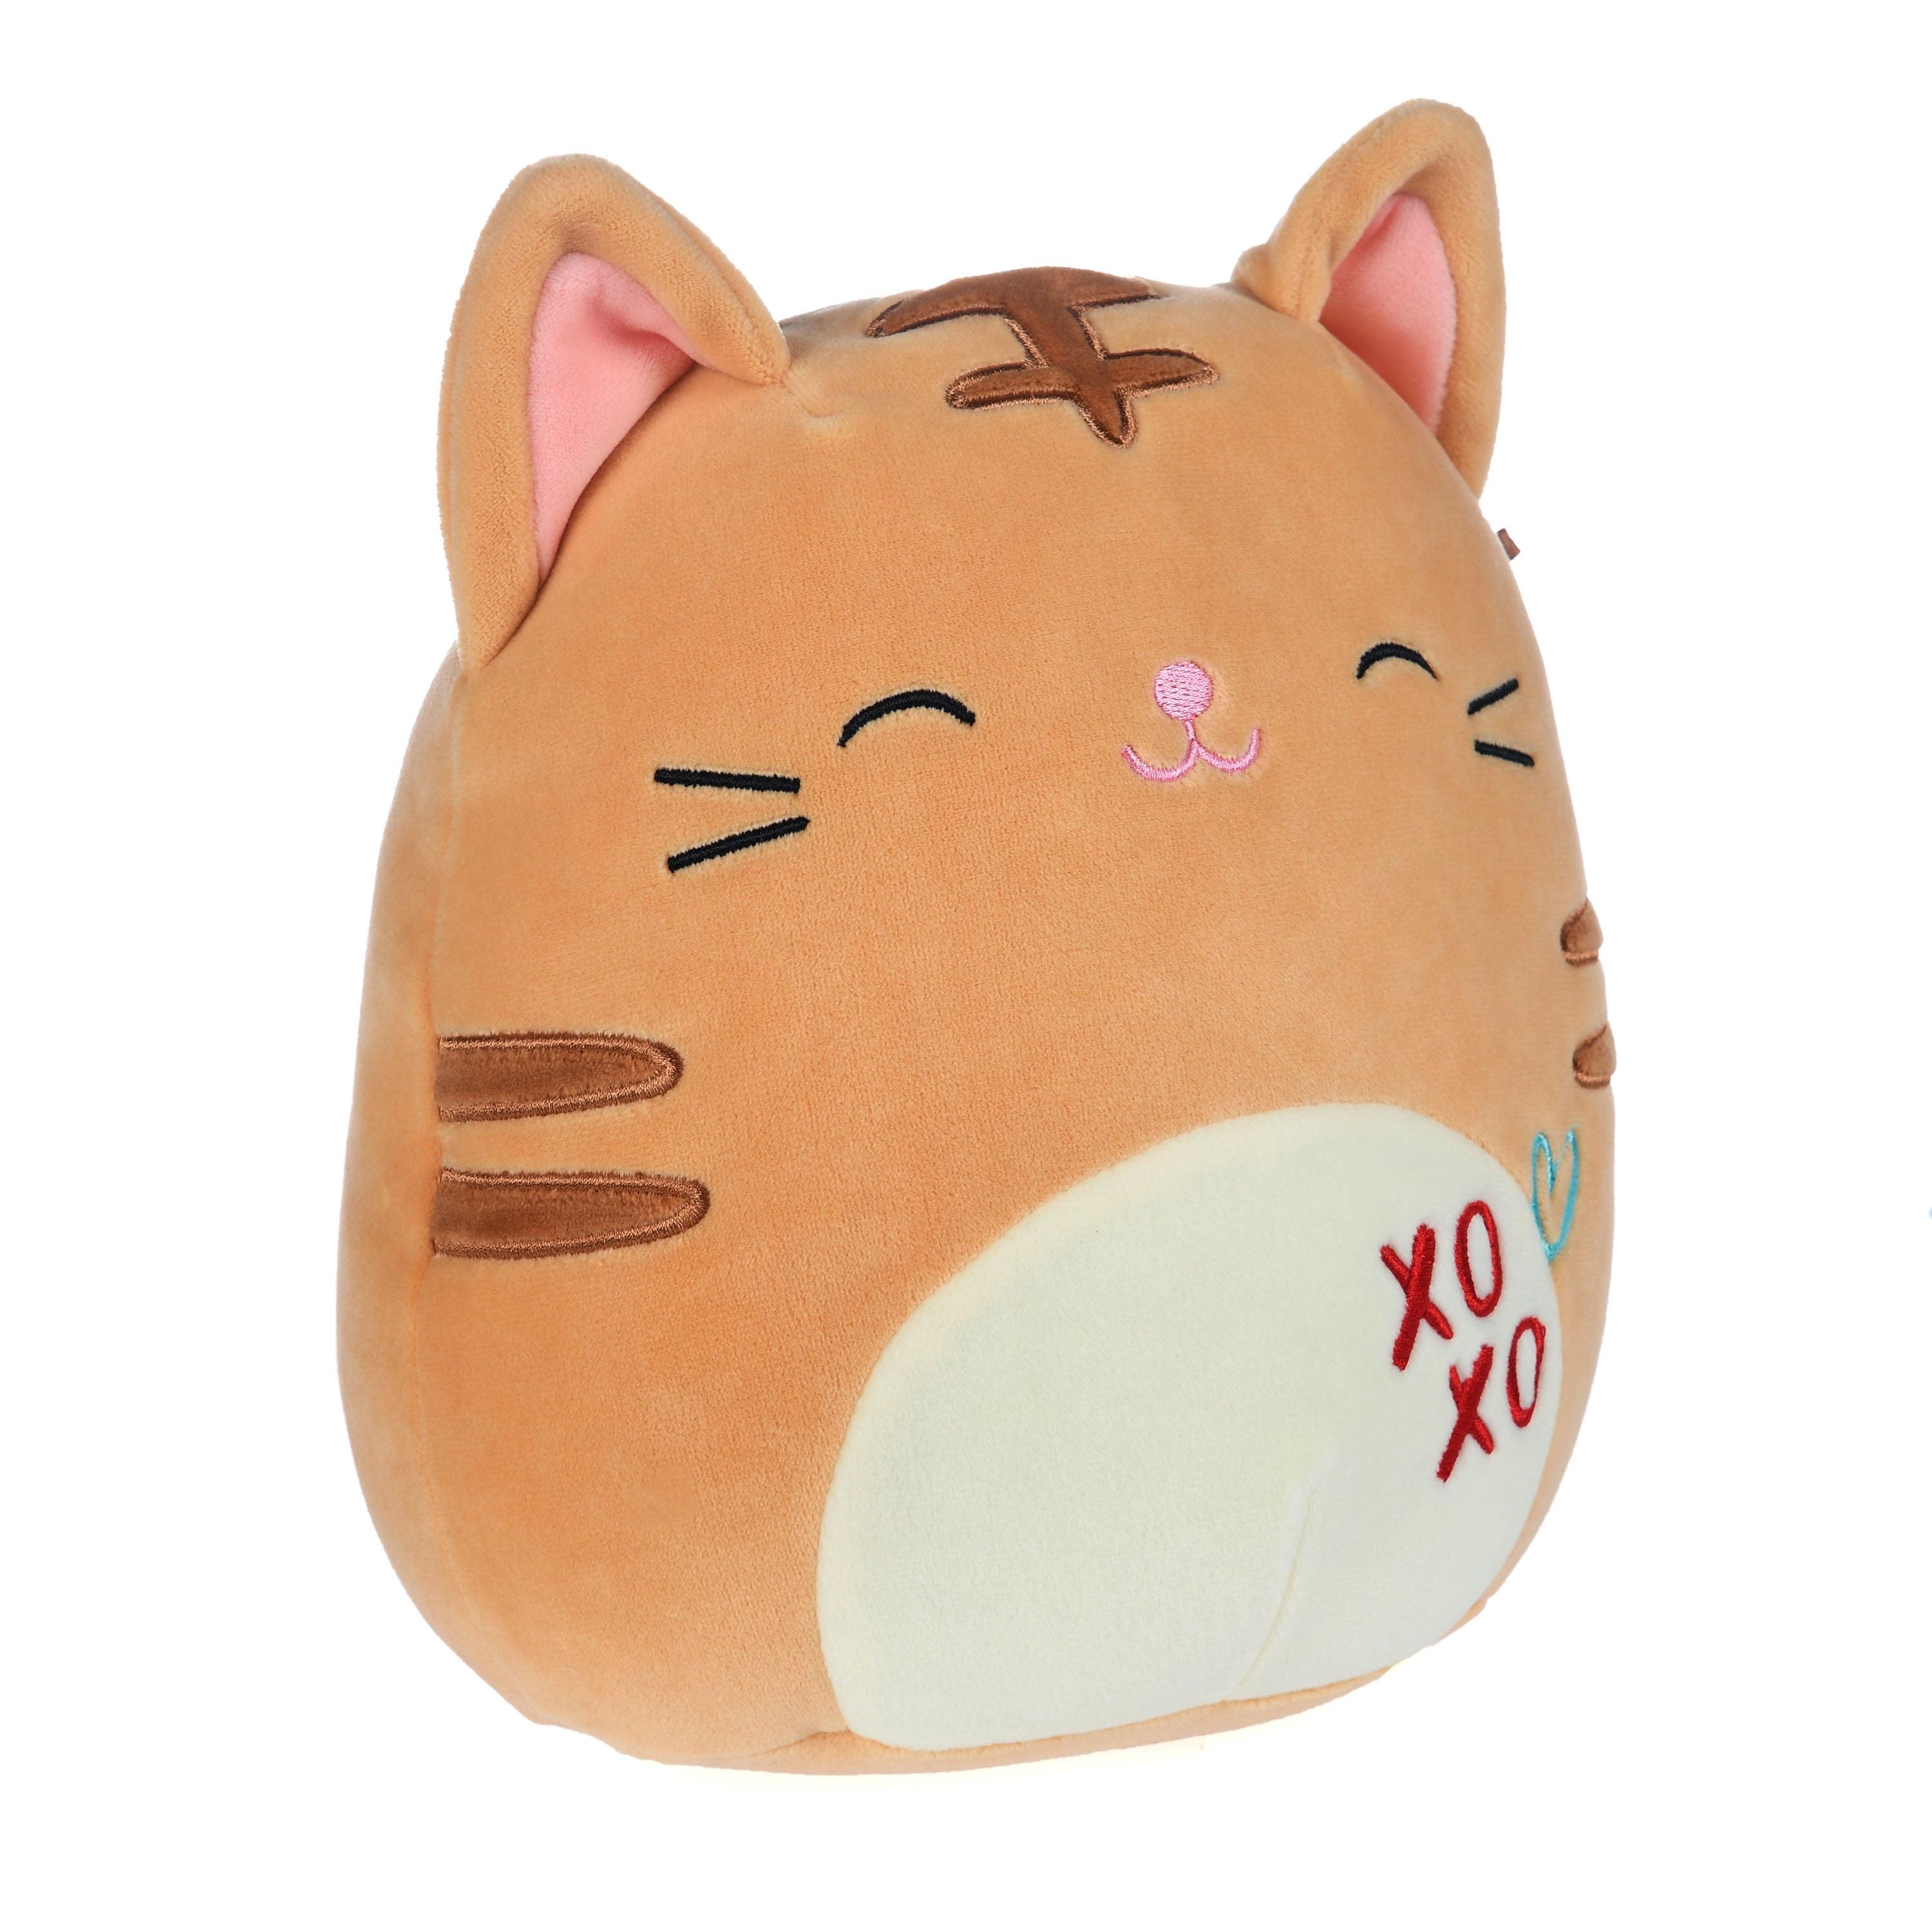 SQUISHMALLOW KELLYTOY JUMBO 16" NATHAN THE GOLDEN BROWN TABBY CAT SUPER SOFT NWT